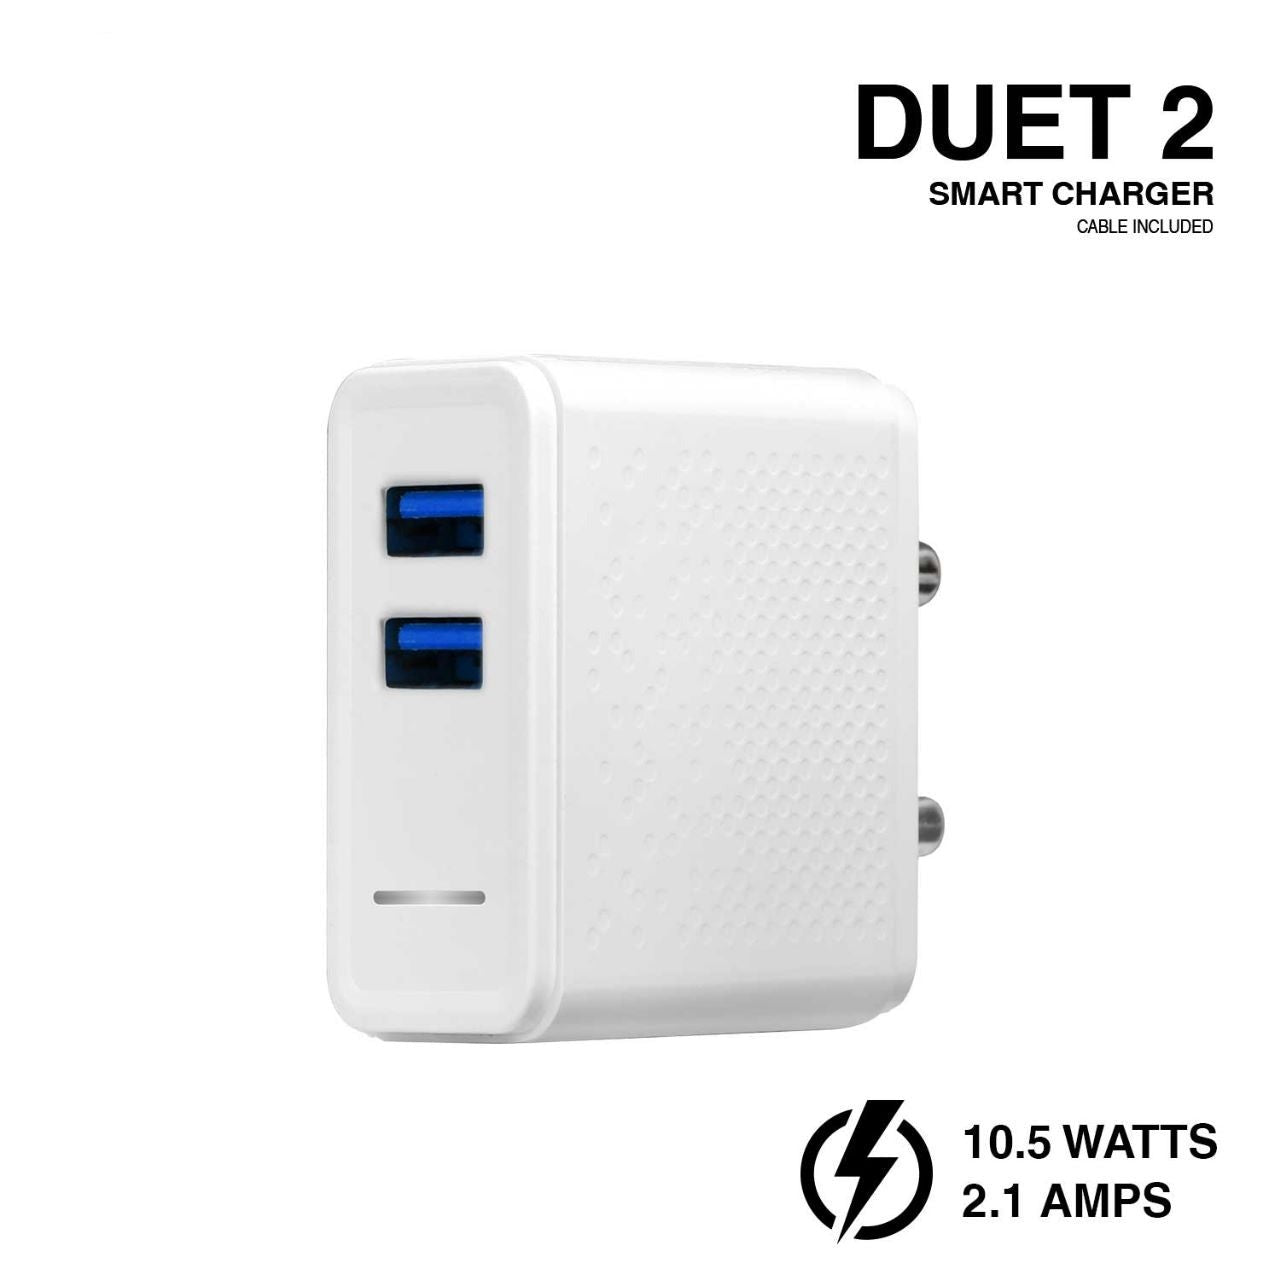 MOBILE CHARGER DUET 2 (2.4 AMP)WITH MICRO USB (MICRO USB CABLE INCLUDED) (WHITE)